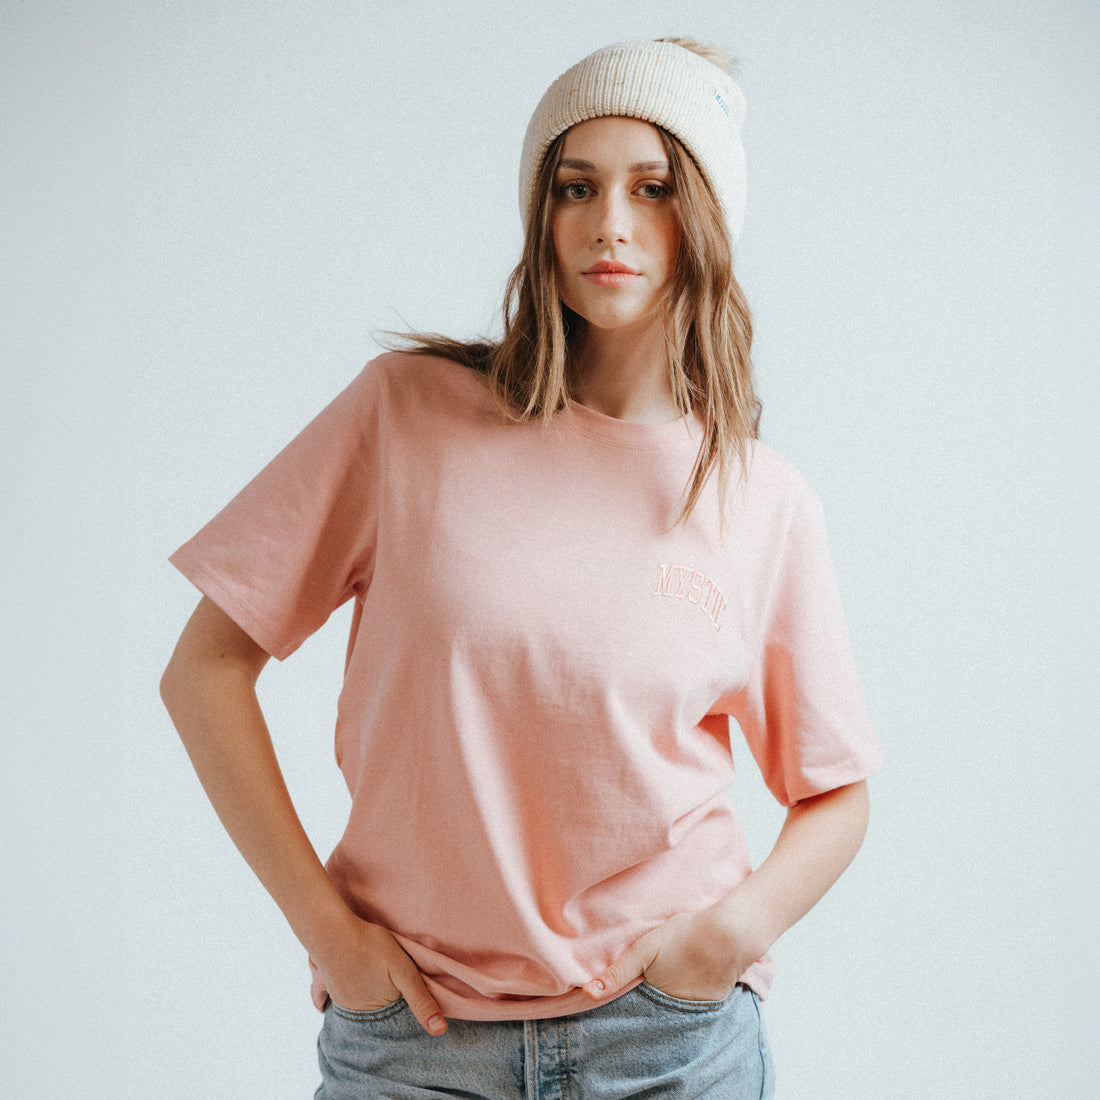 Mystic Embroidered Heavyweight Tonal T-Shirt in Dusty Rose